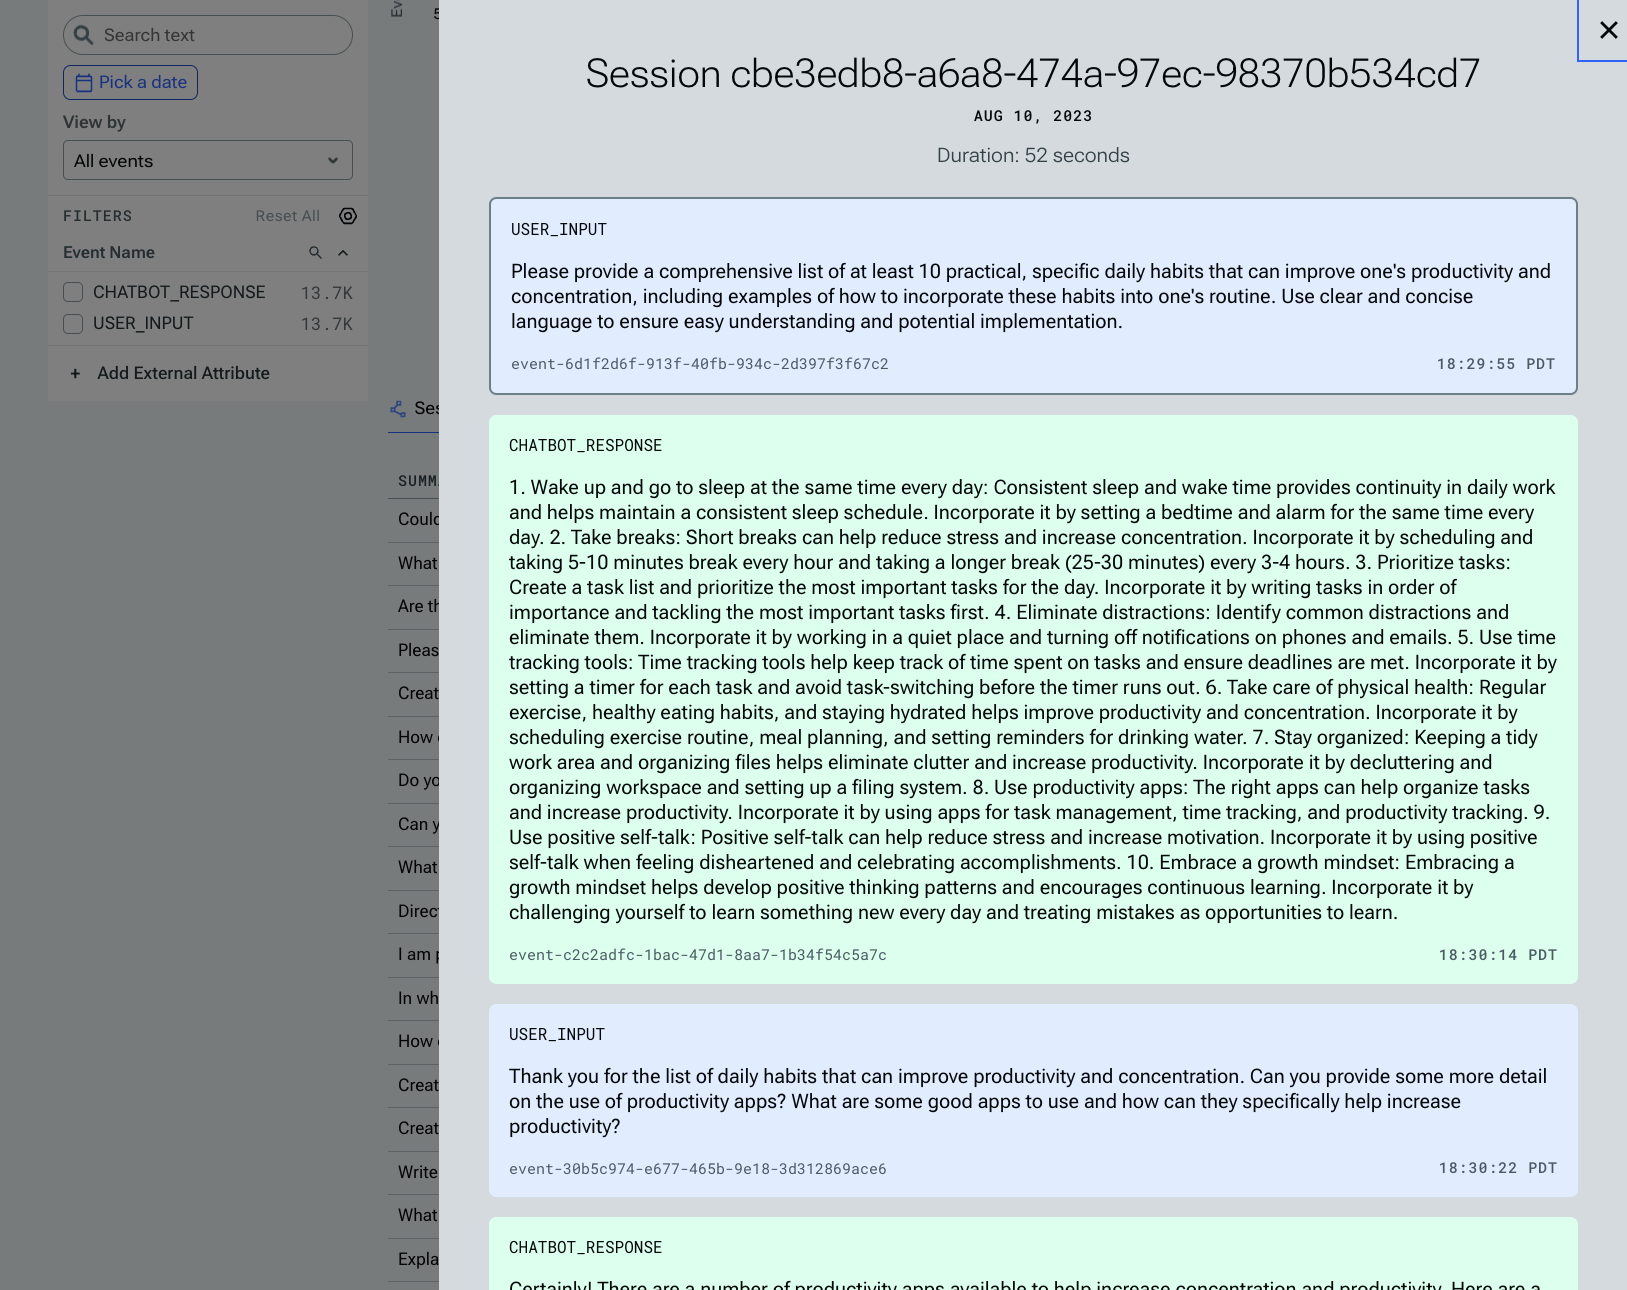 Tidepool provides a convenient way to view any session/event in context. Currently viewing a multi-part conversation between the user and a chat agent.